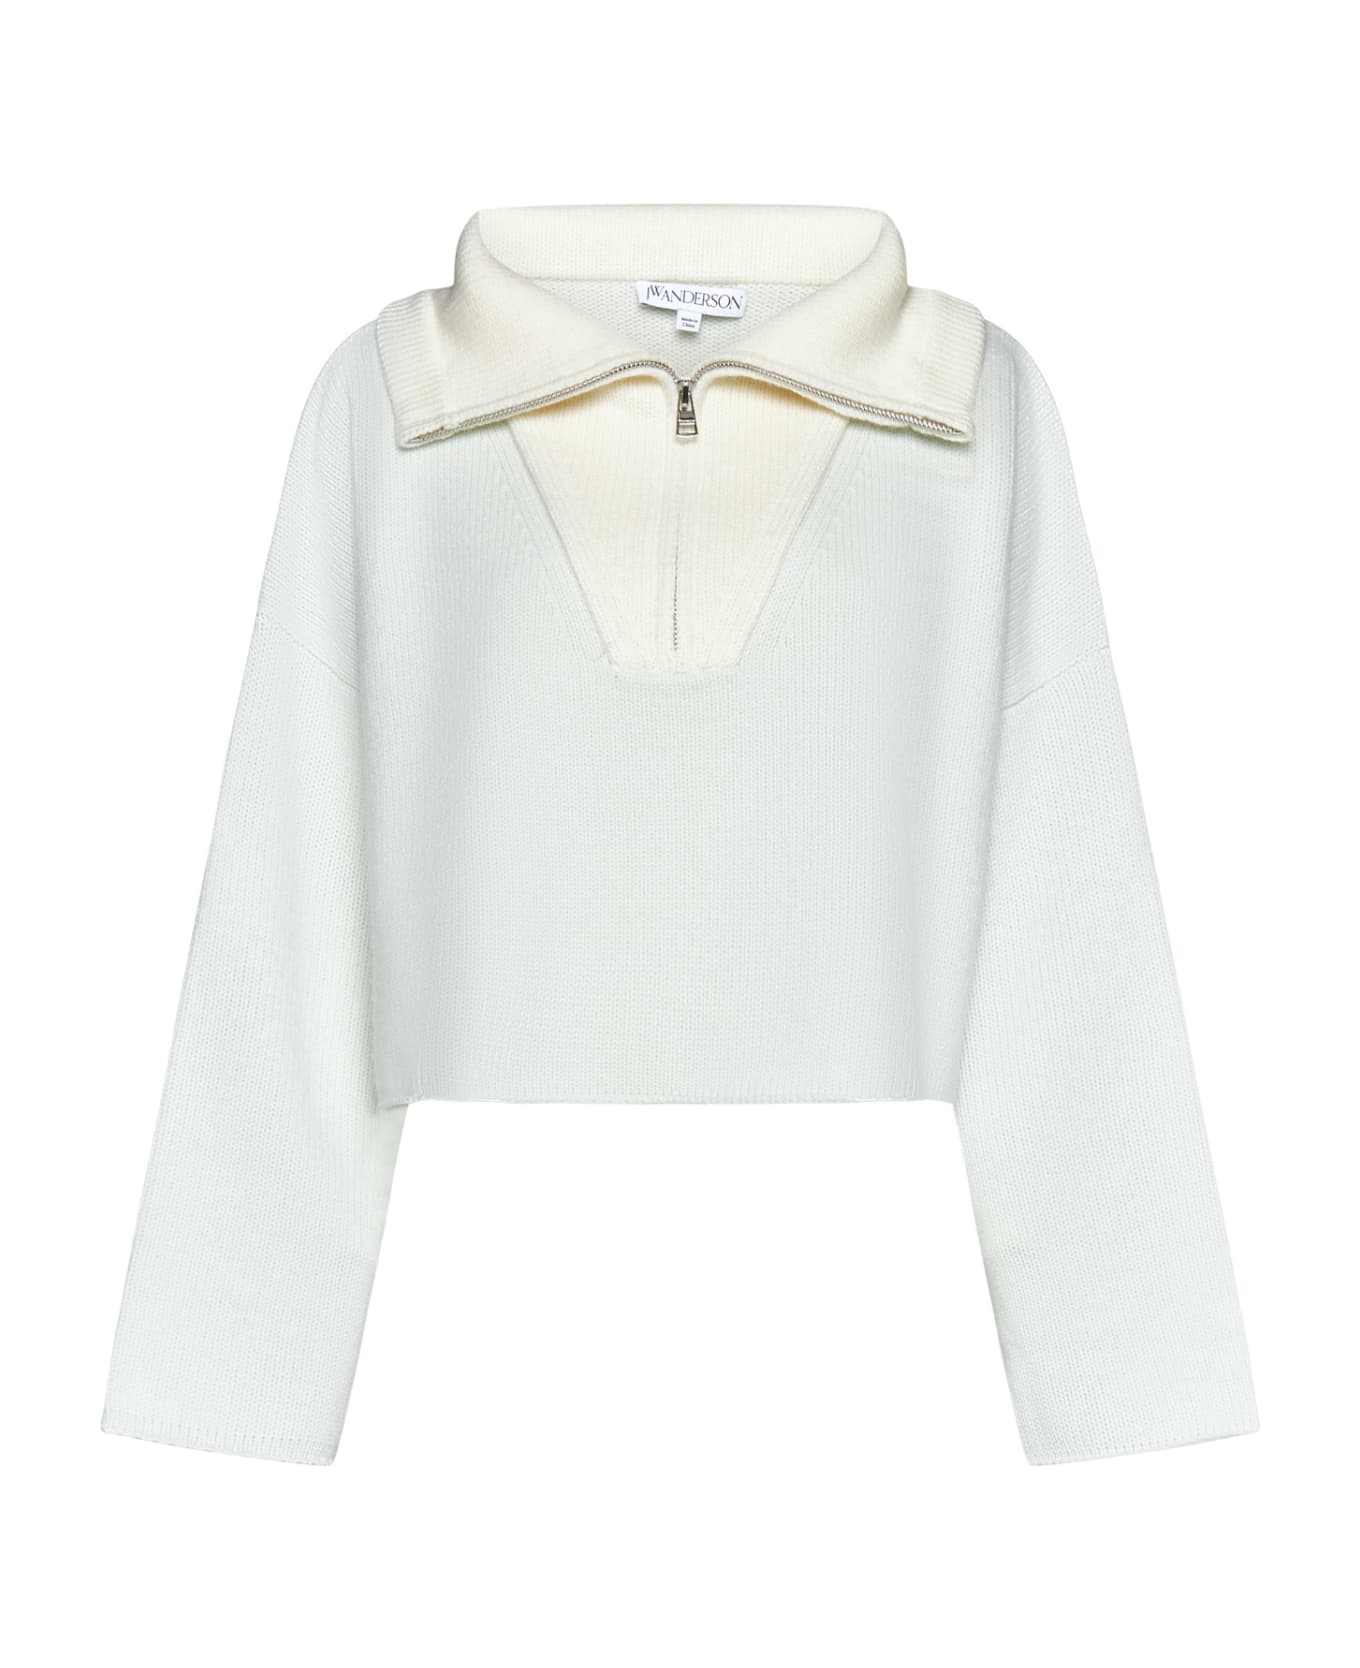 J.W. Anderson Sweater - Mint off white